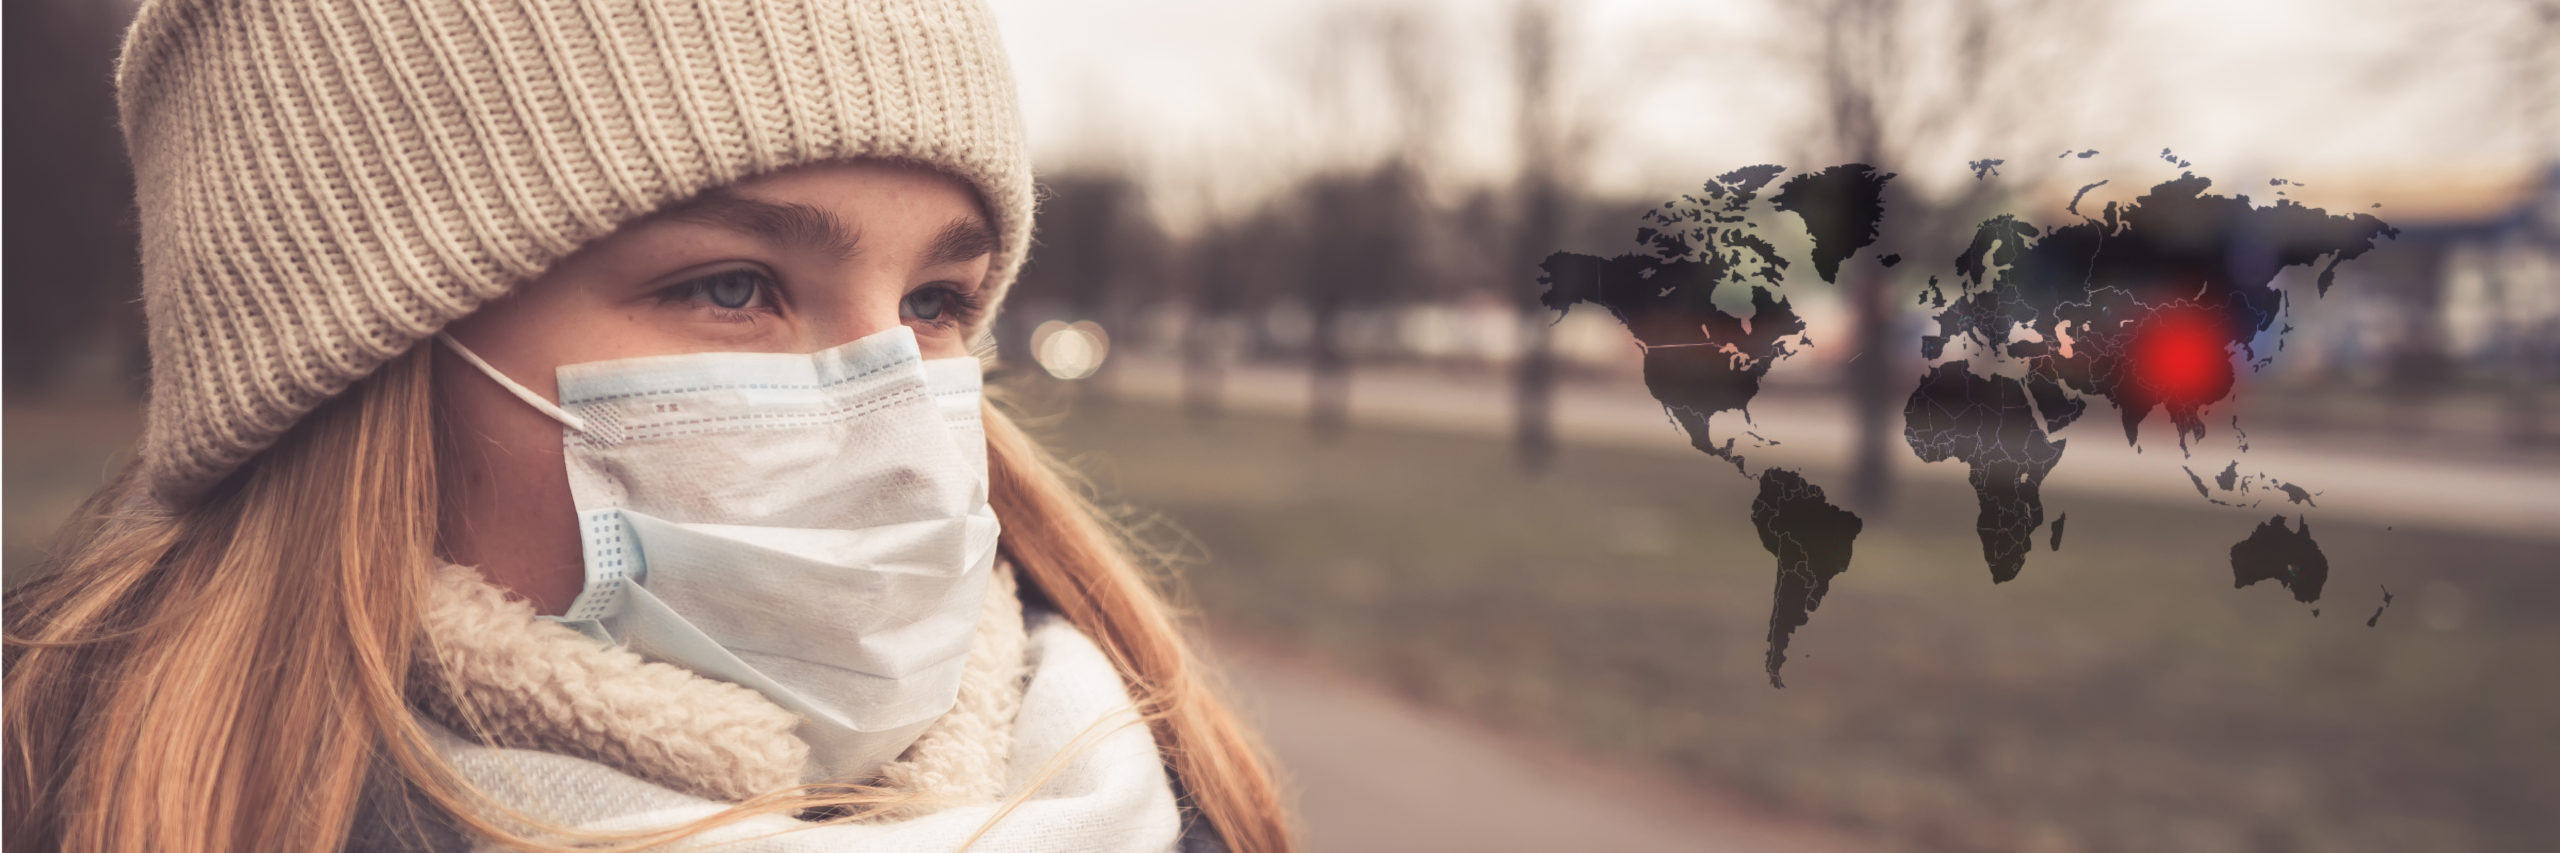 girl wearing mask during COVID-19 pandemic